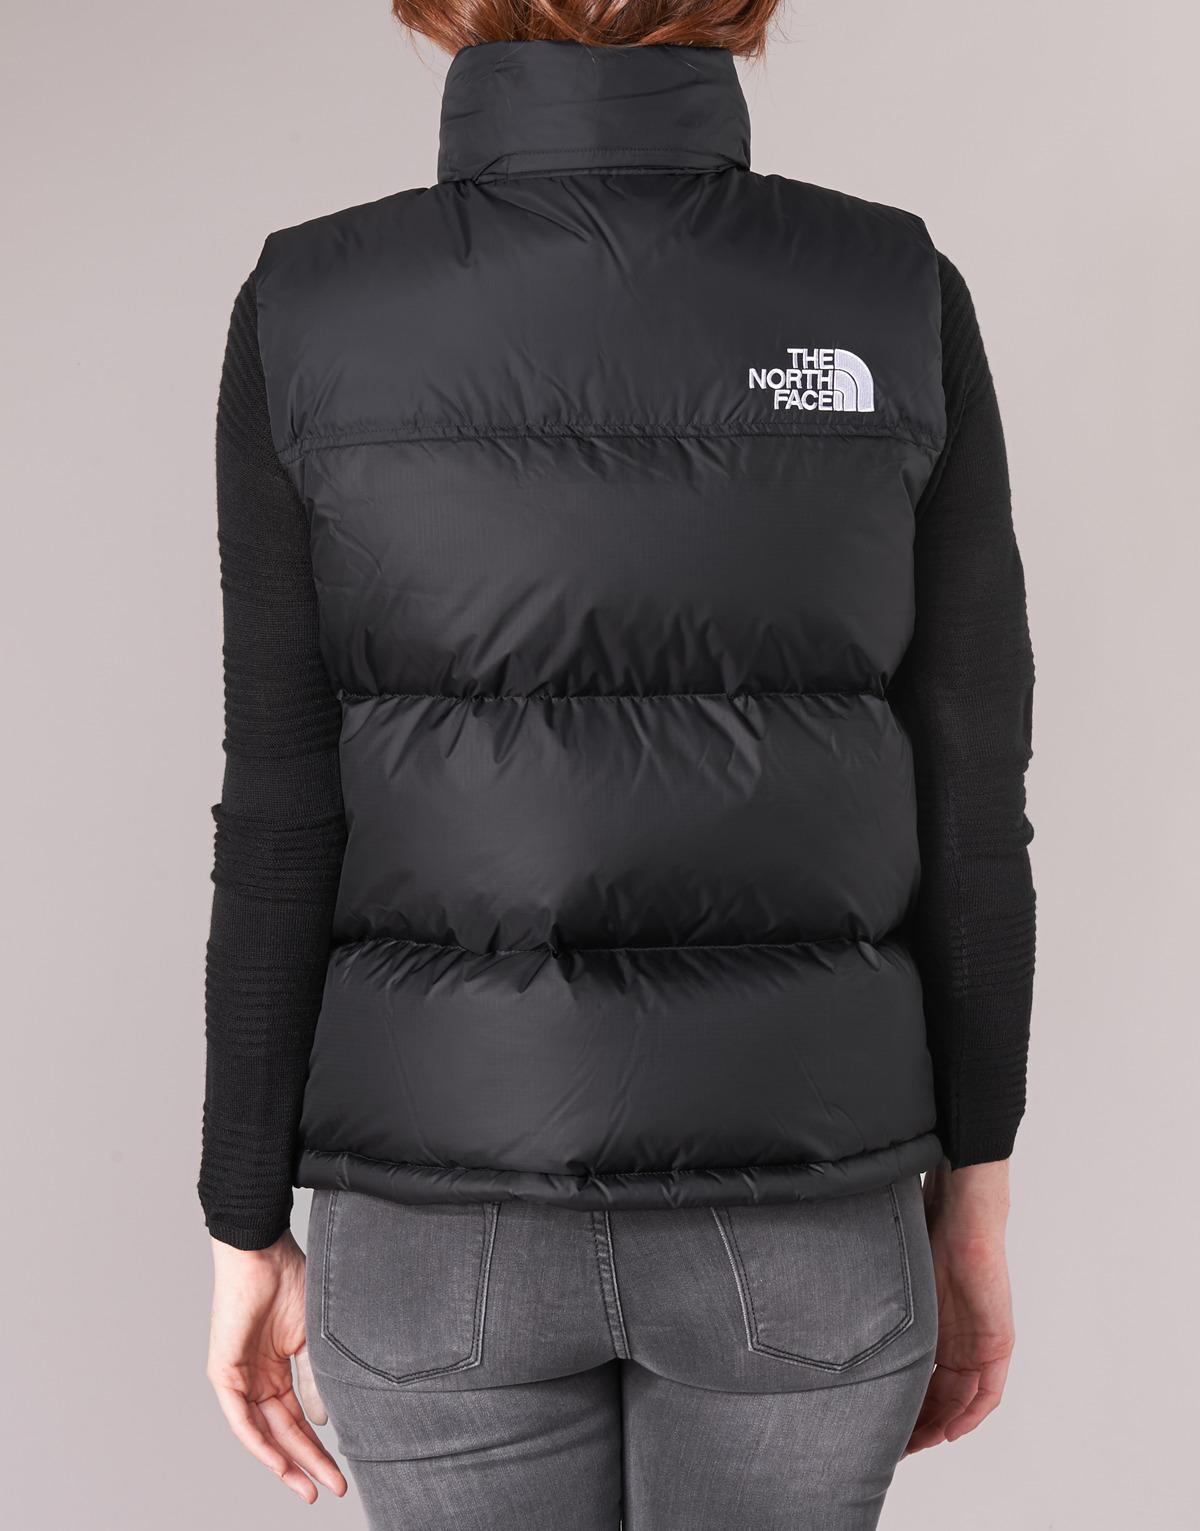 The North Face Nuptse Vest Women's Jacket In Black - Lyst